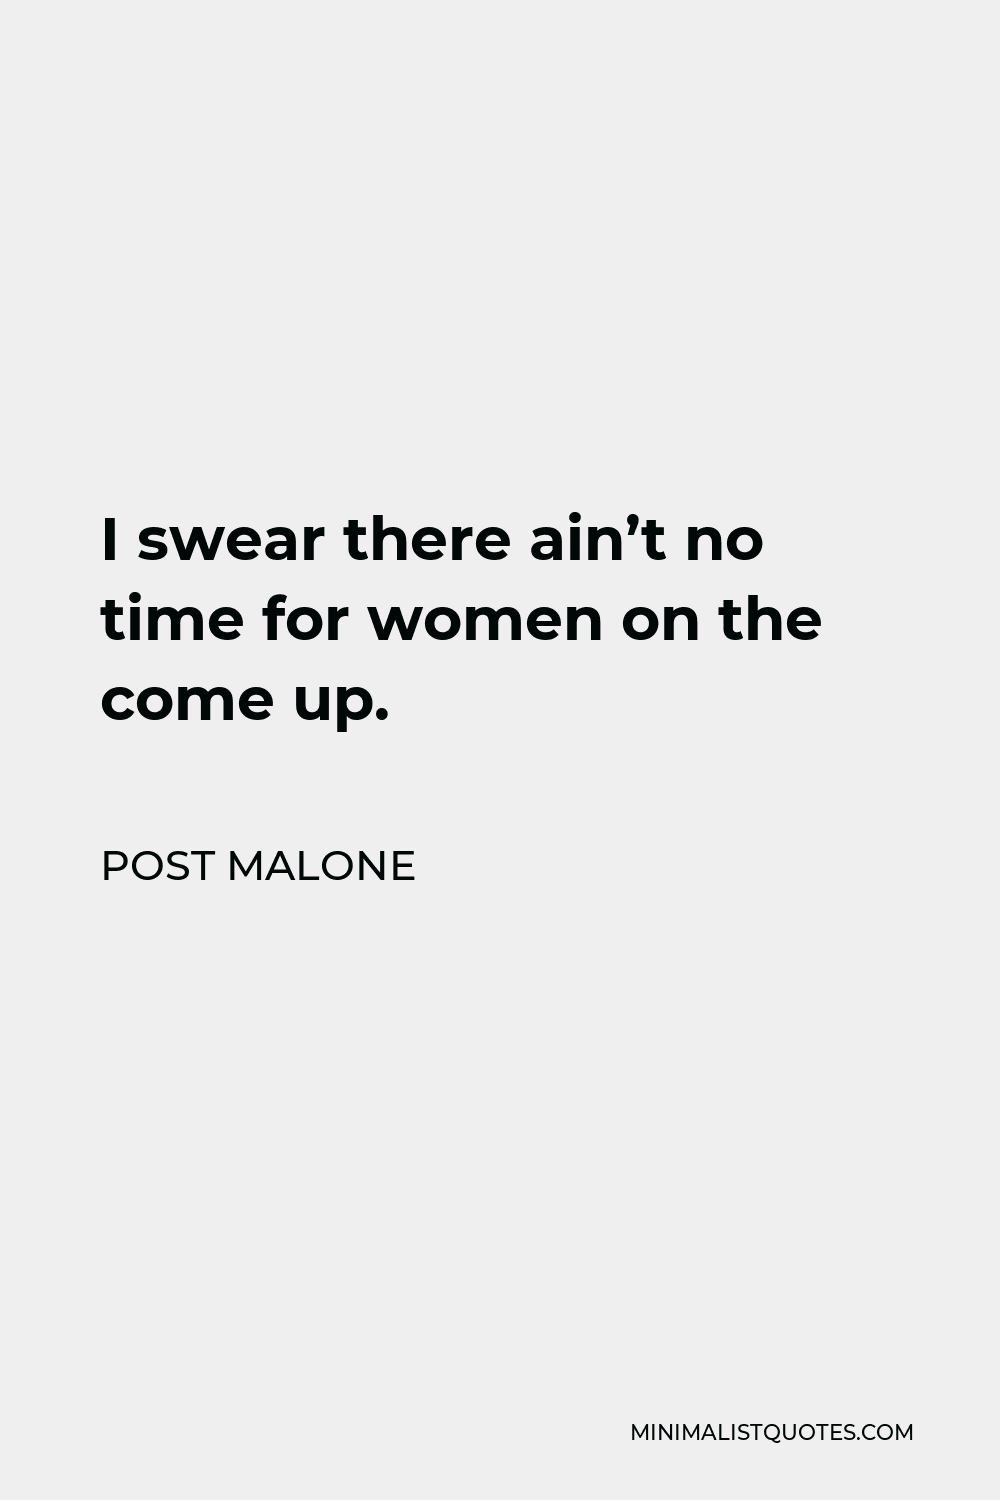 Post Malone Quote: I swear there ain't no time for women on the come up.